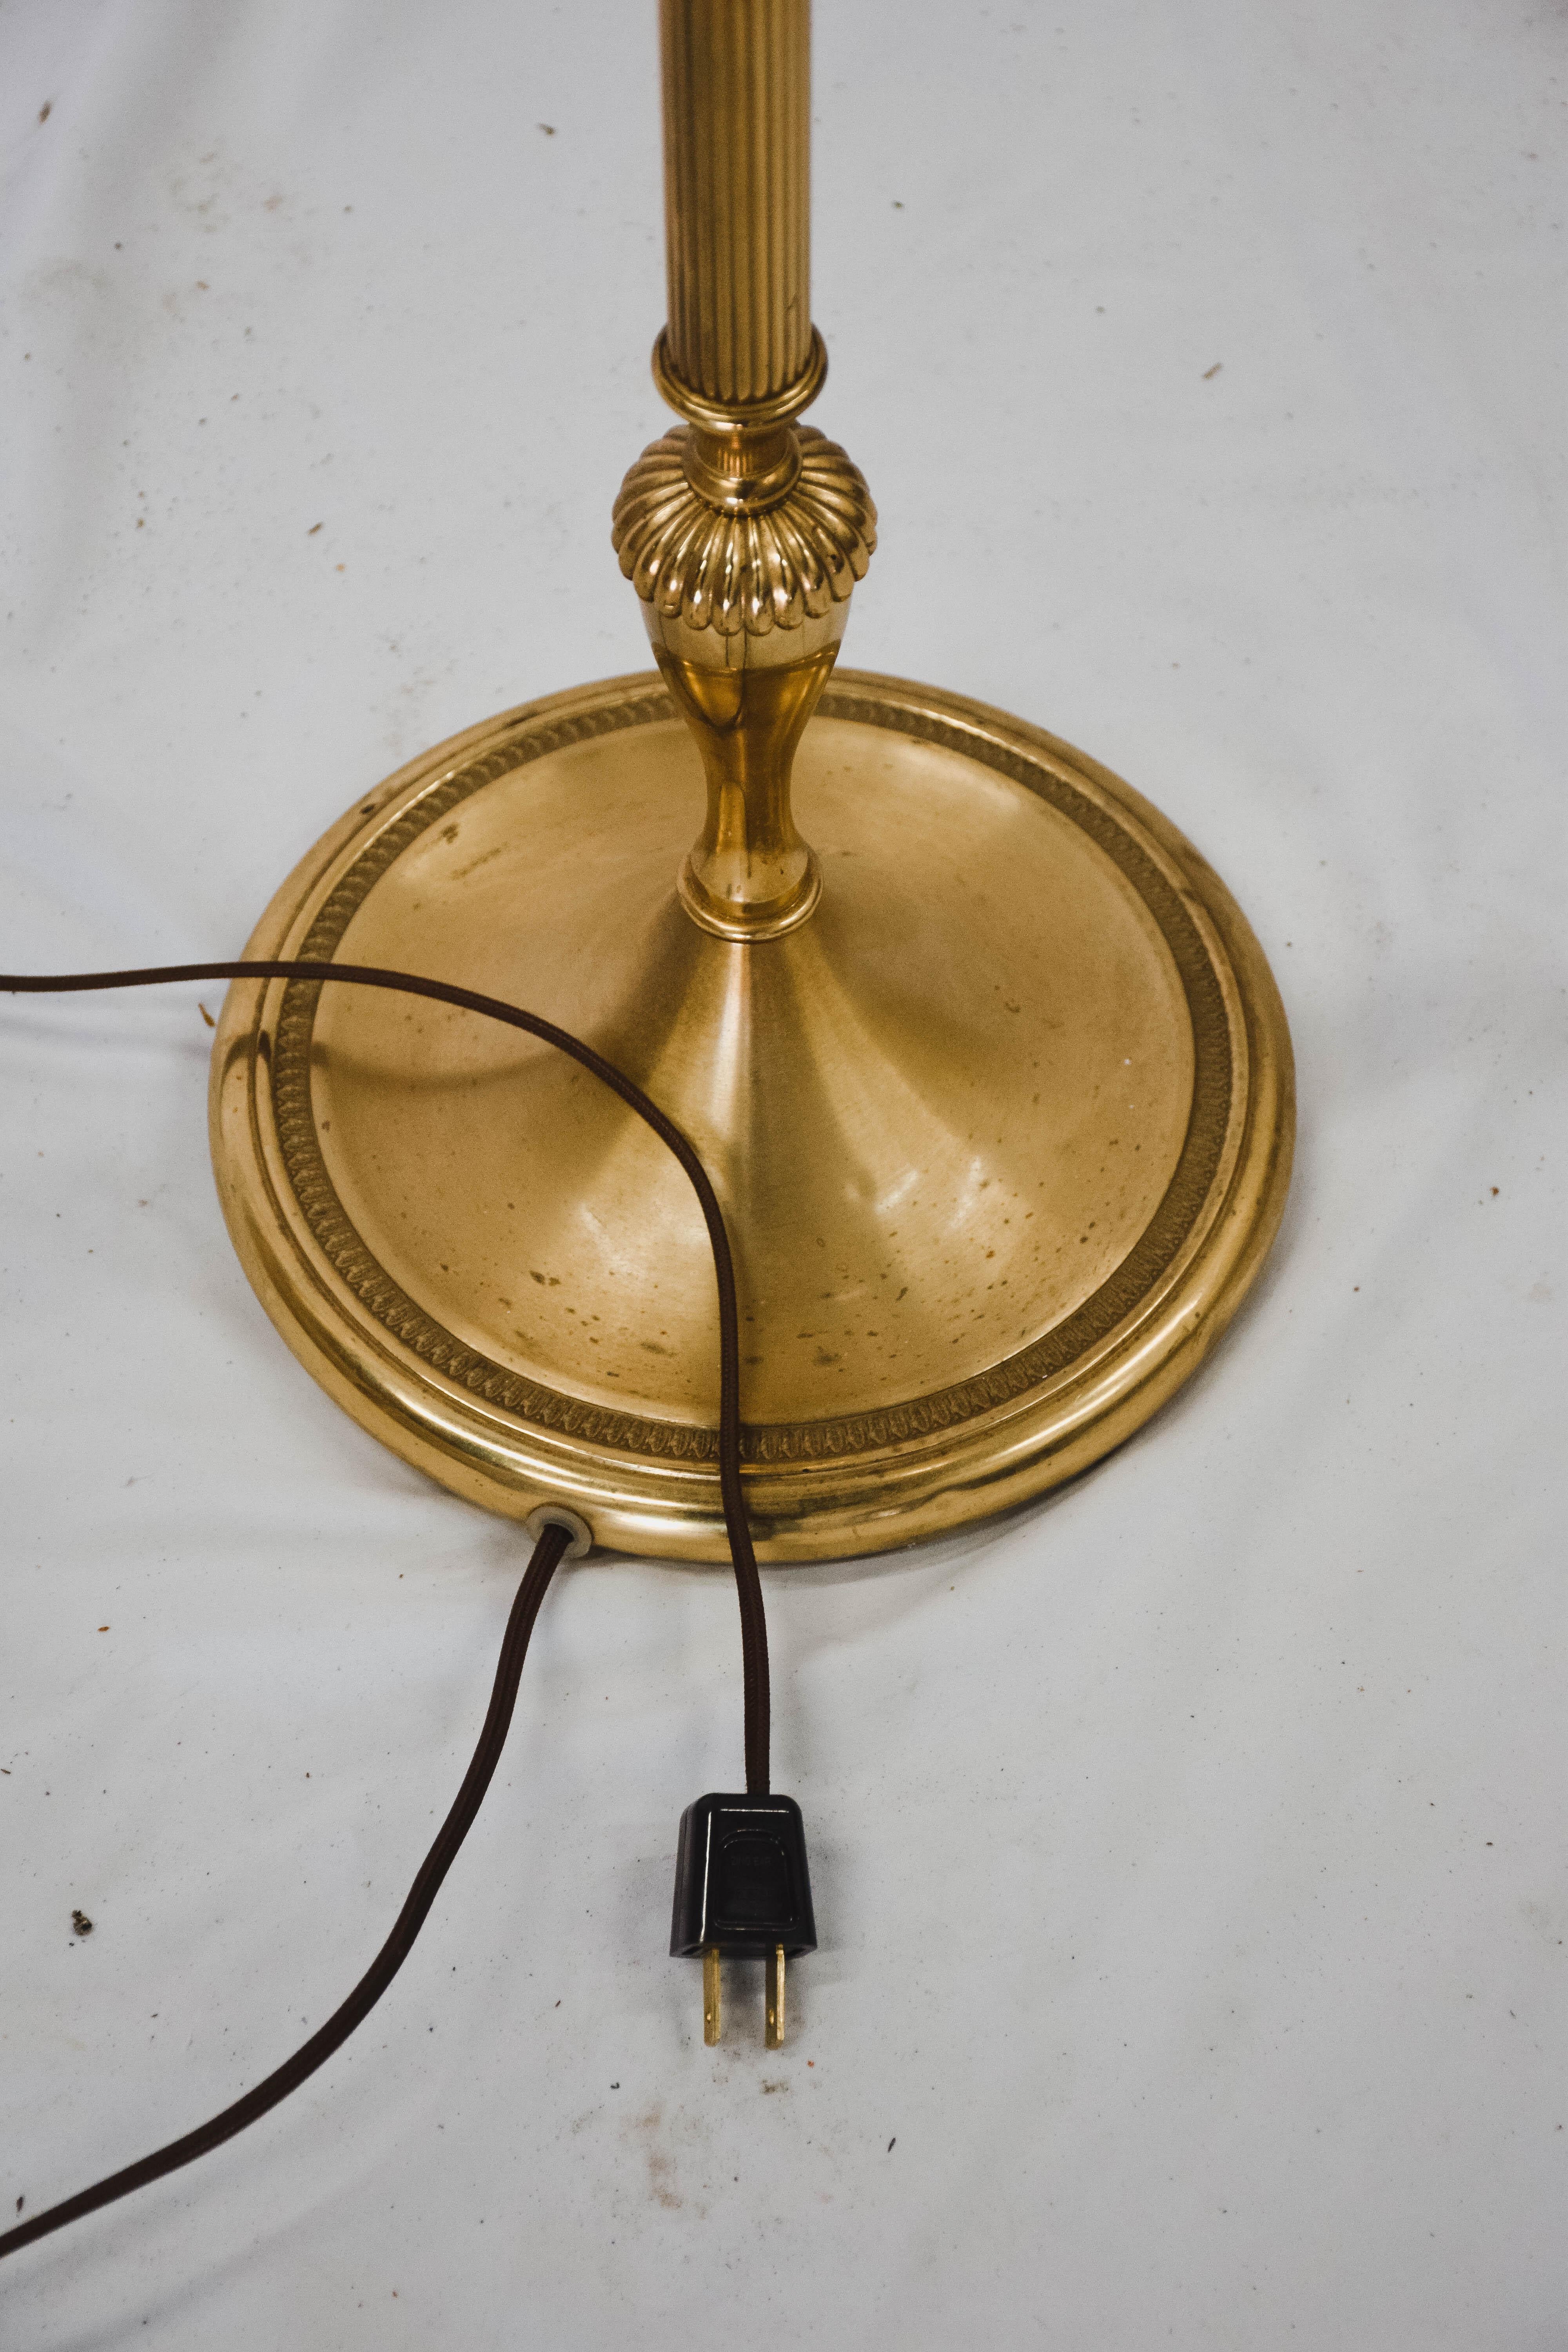 This pineapple floor lamp is made of brass and gilt metal with a black shade, gilt inside. This is a very decorative floor lamp, in the style of famous French designer and maker Maison Charles, circa 1960. Original shade.